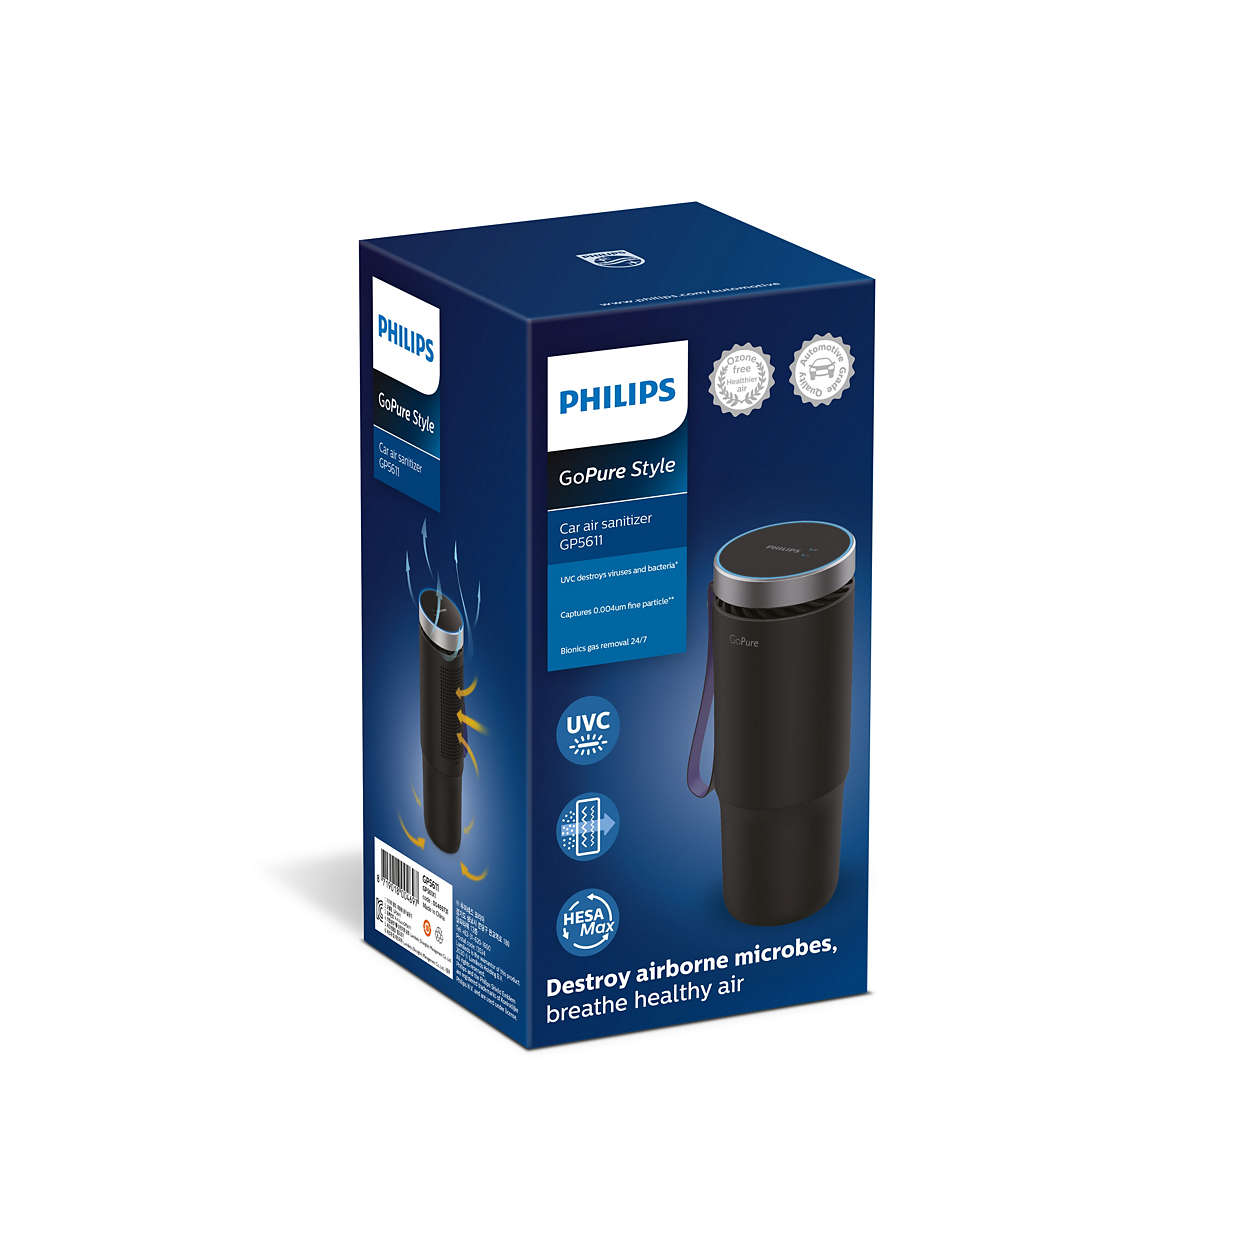 In response to the rural jump in GoPure Style Car air purifier LUMGP561C1/50 | Philips